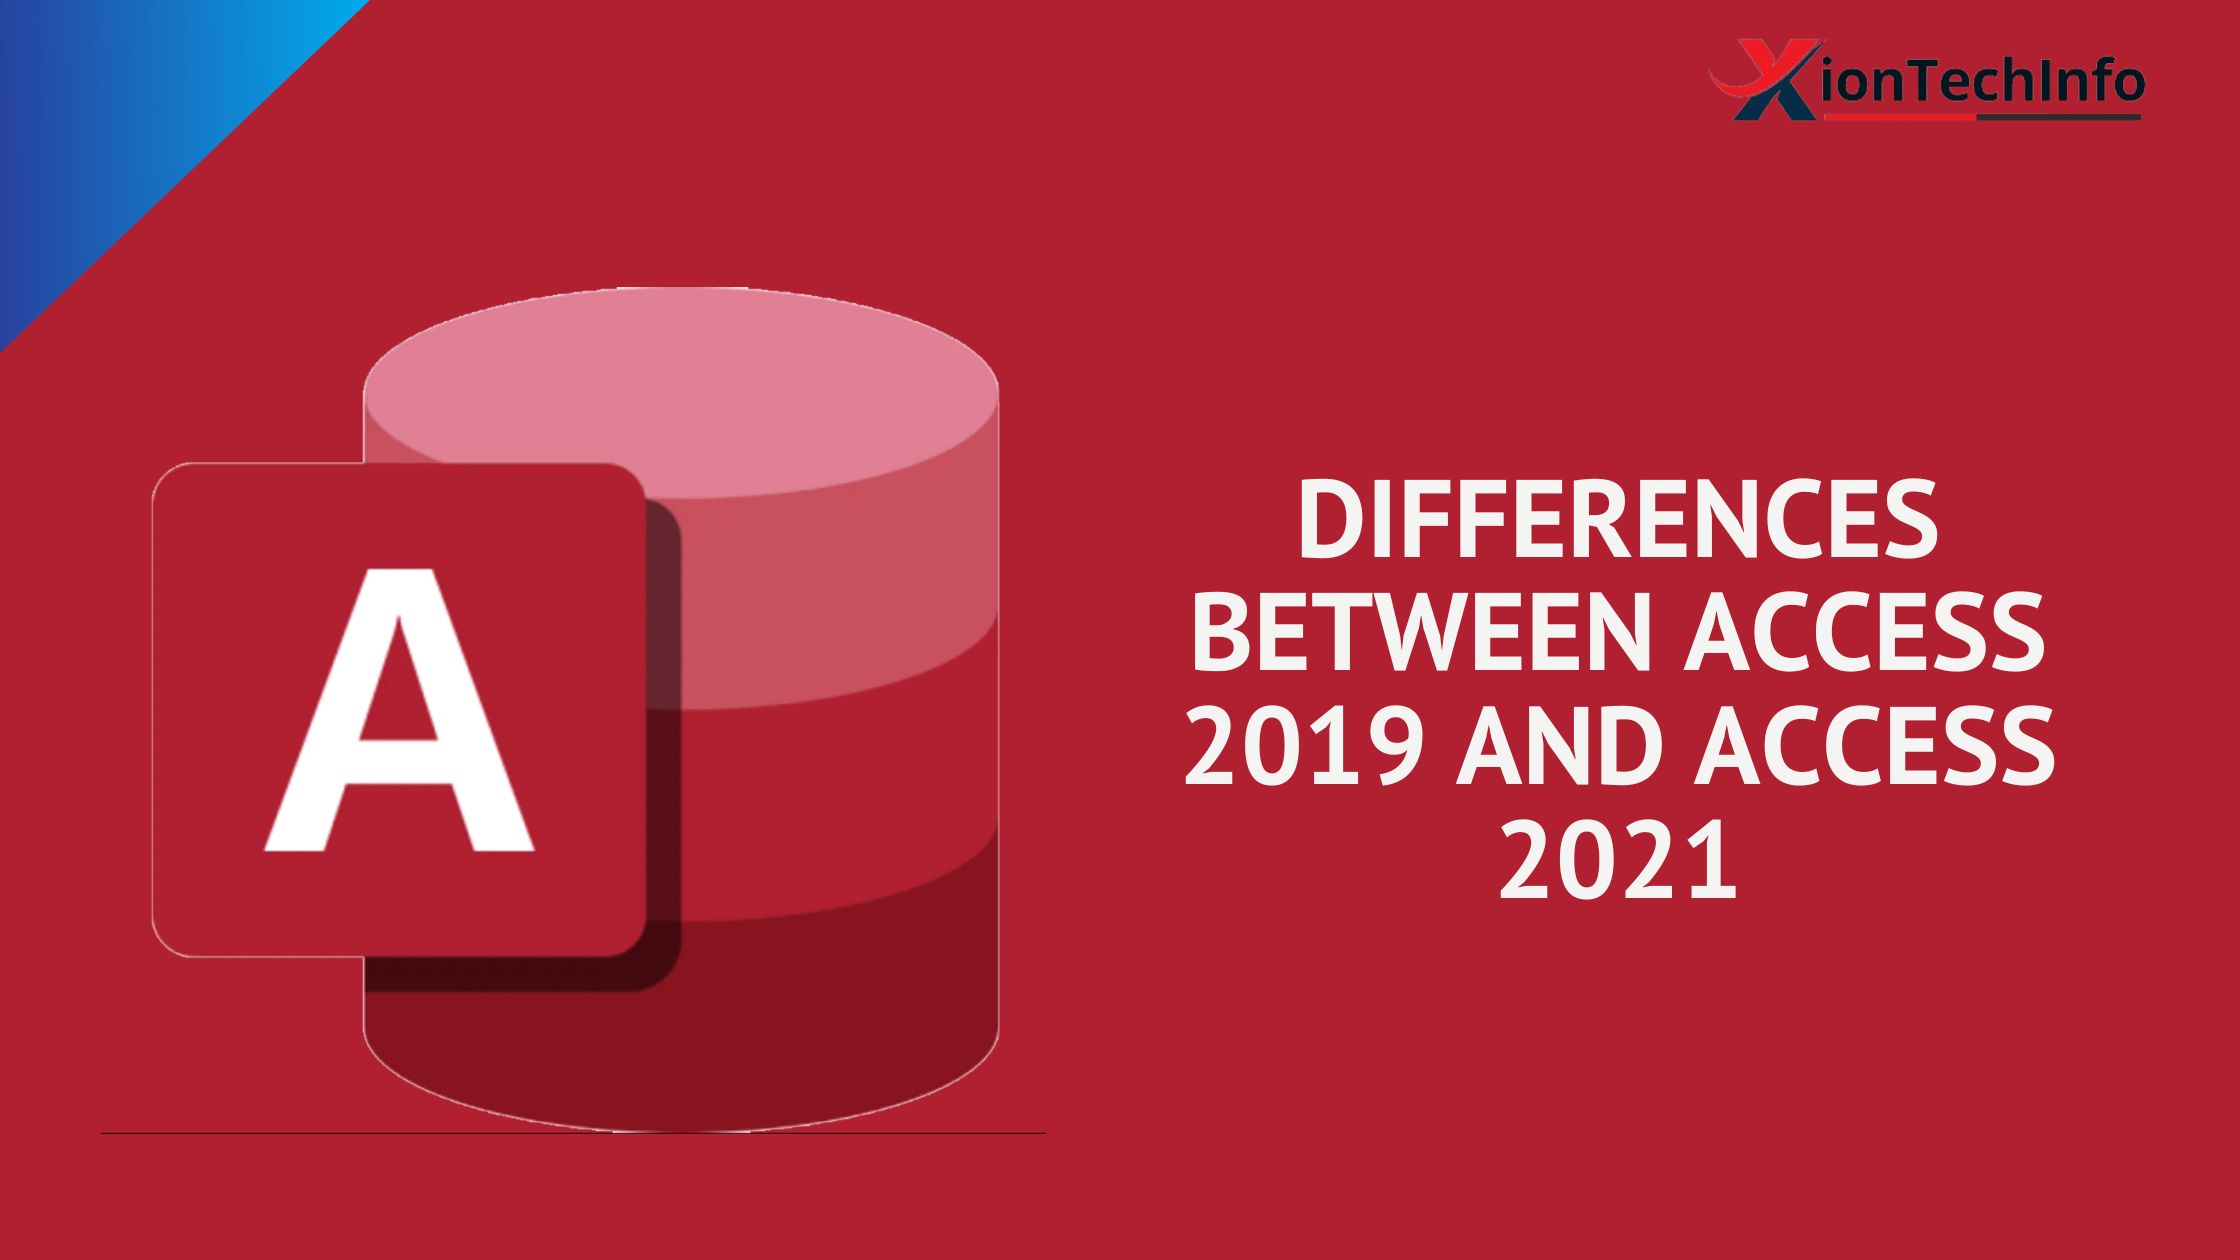 Differences between Access 2019 and Access 2021